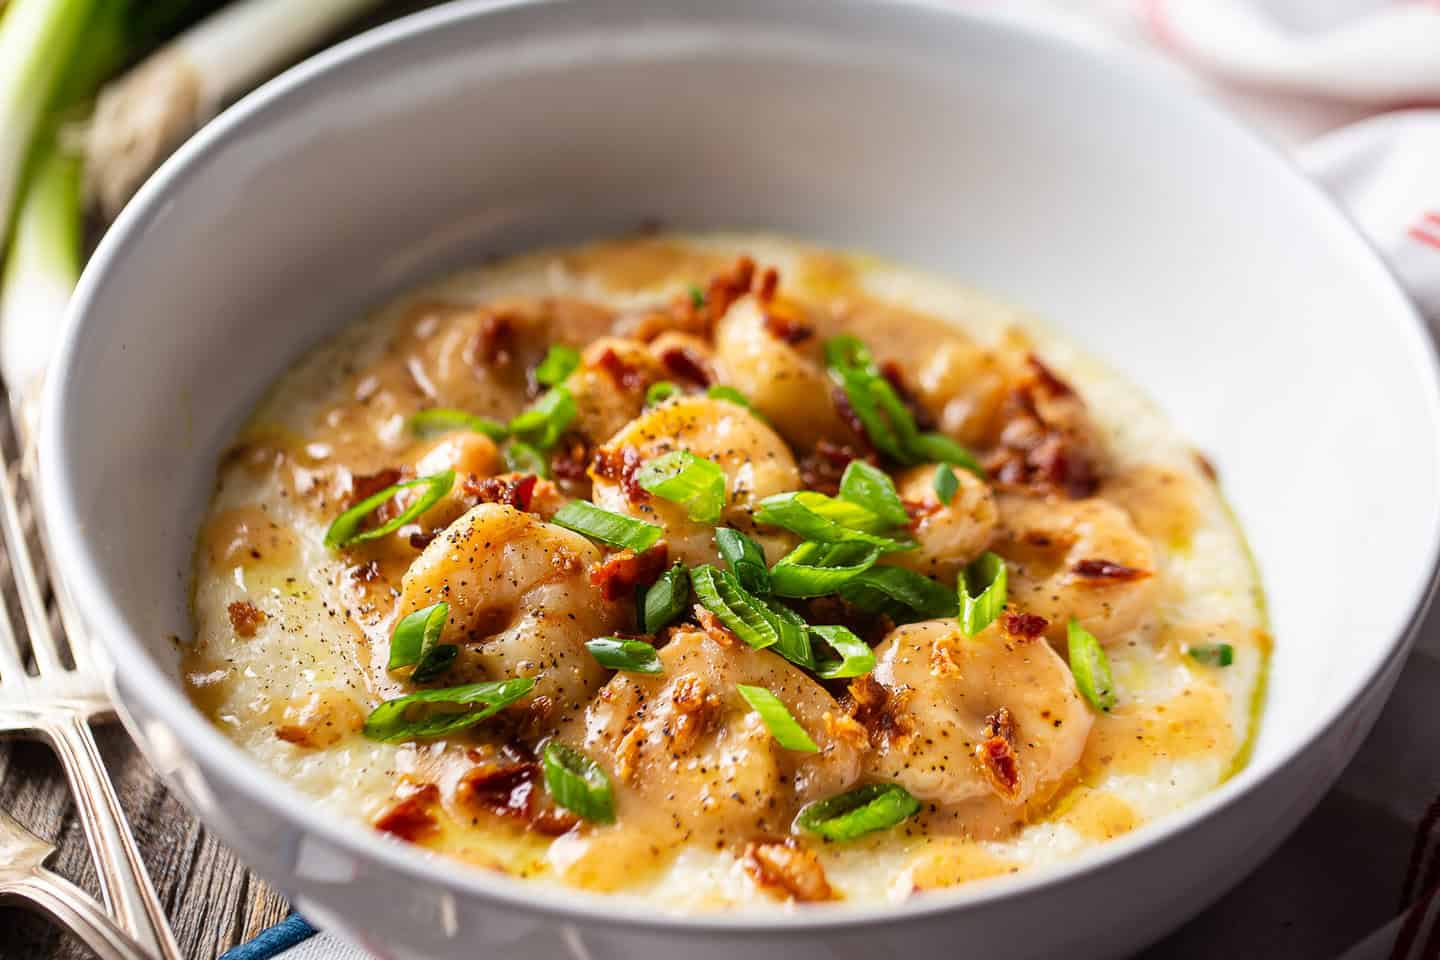 Best shrimp and grits recipe with bacon, scallions, and cheddar cheese.